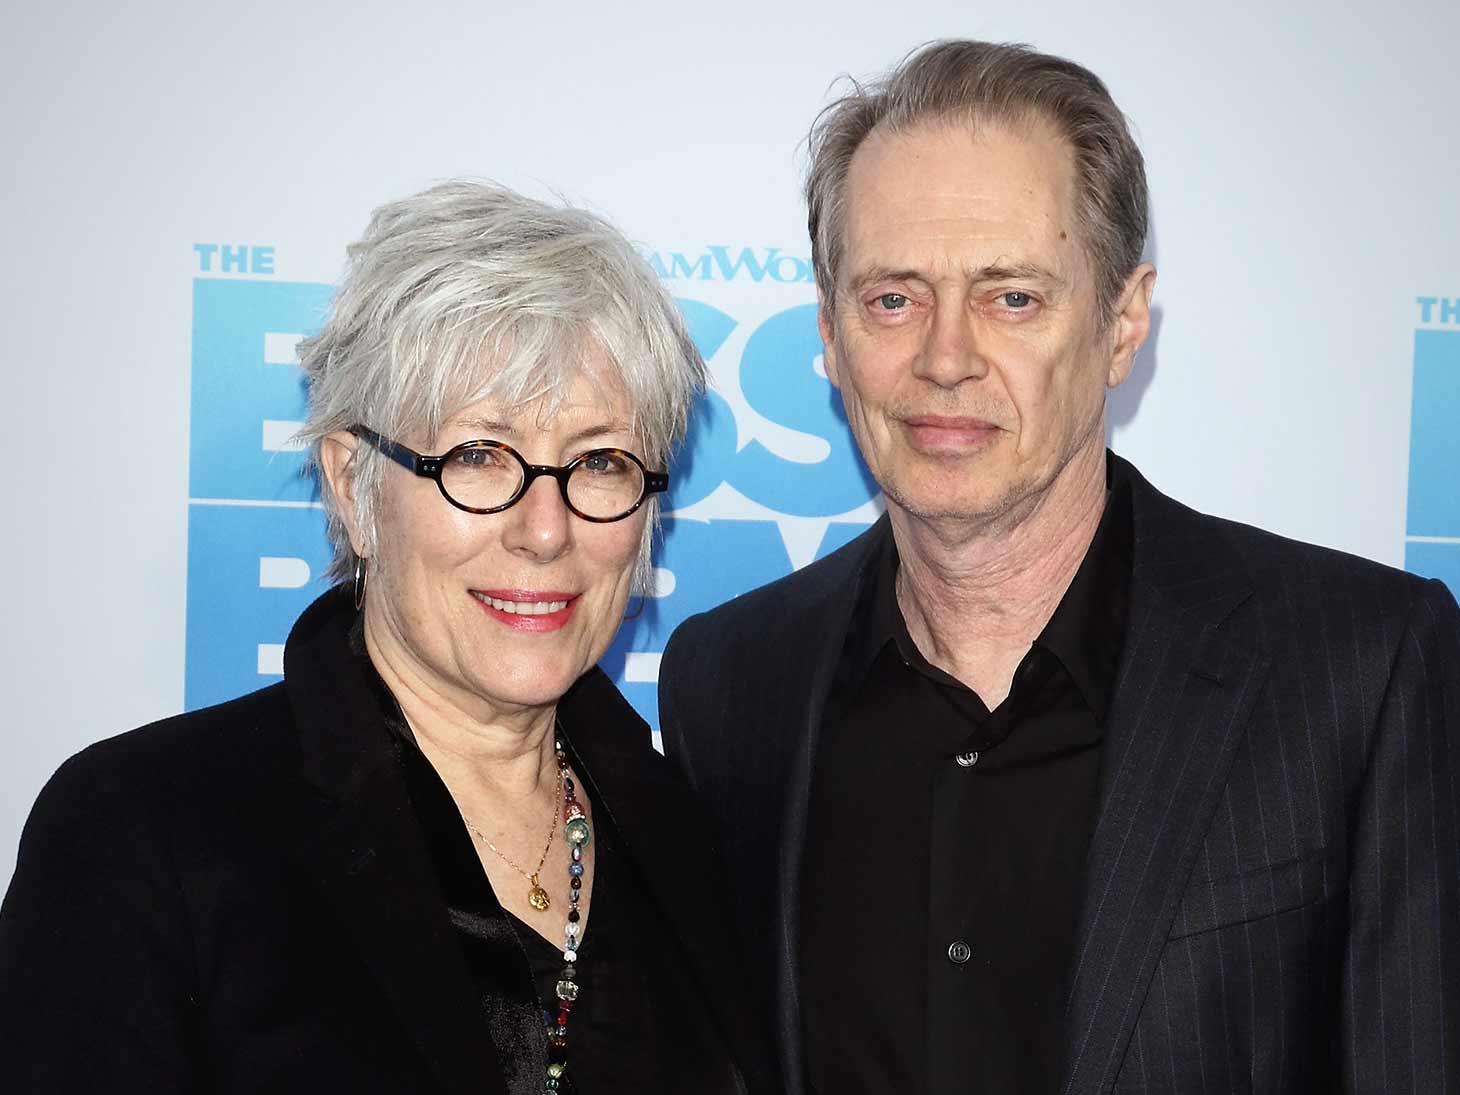 Steve Buscemi’s Wife Dead at 65, Funeral Already Held